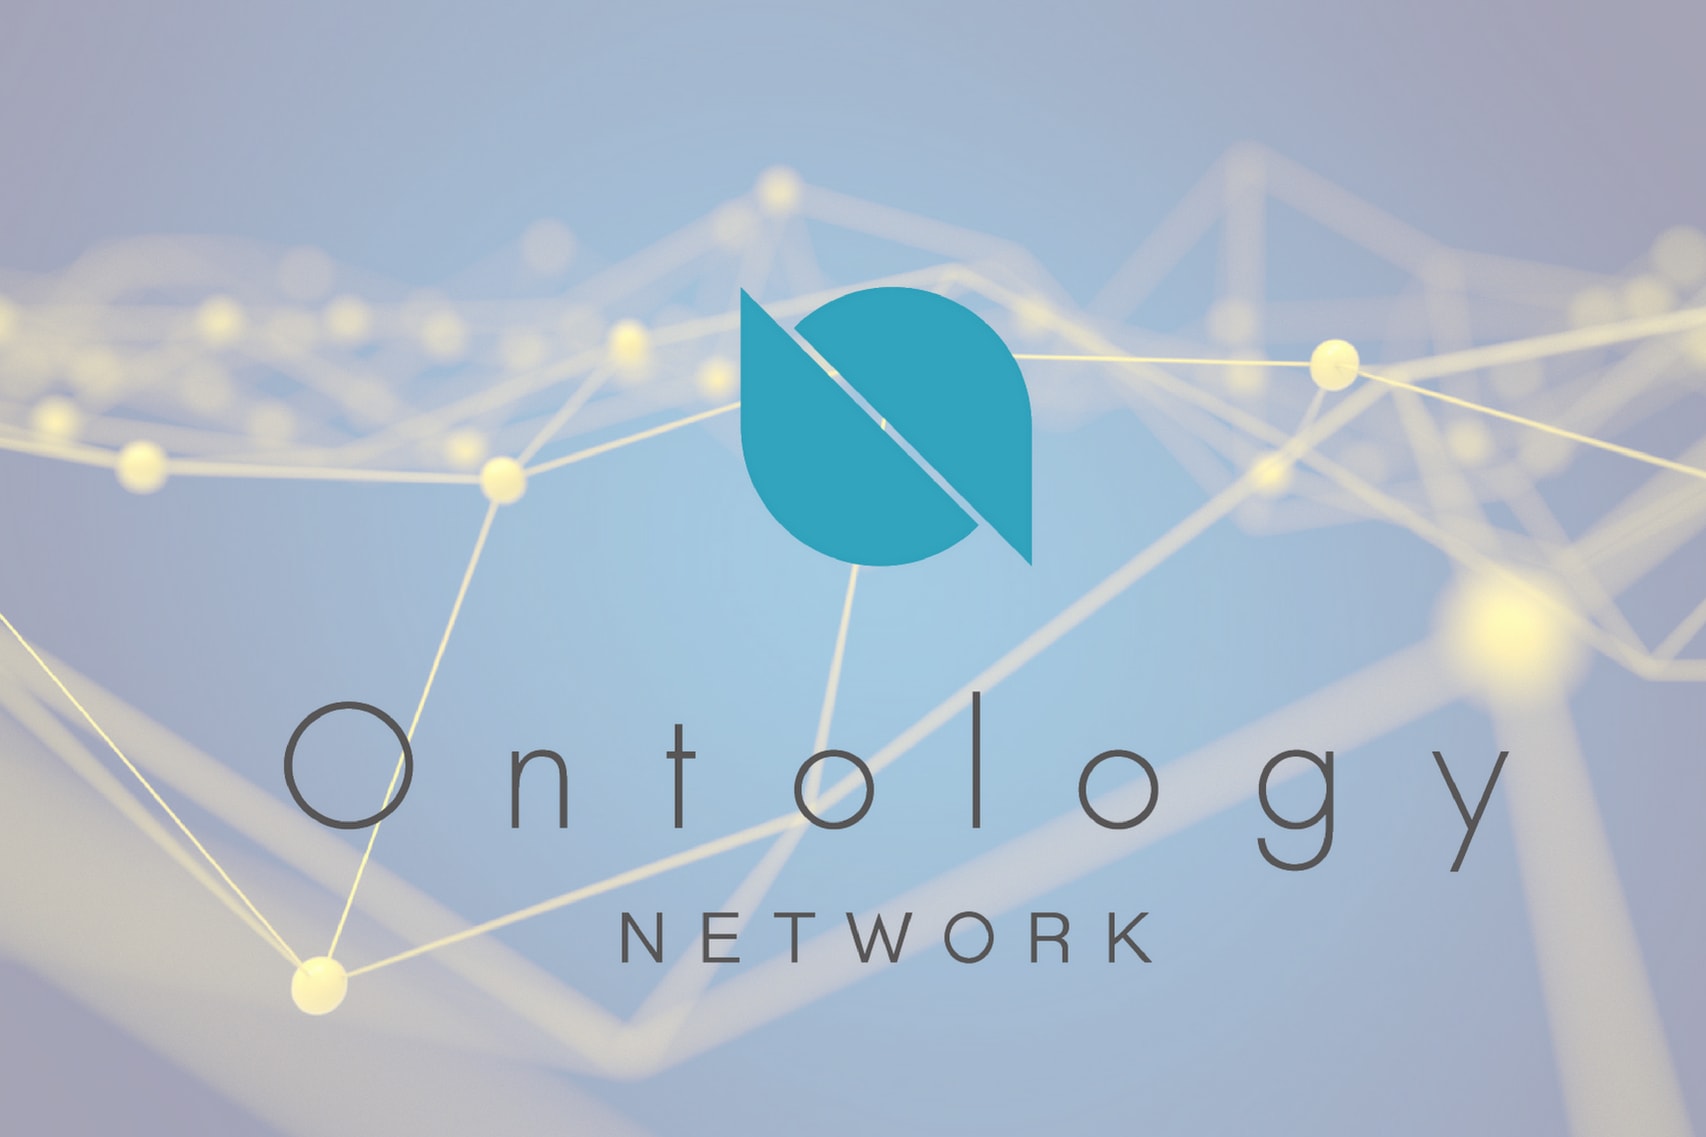 What is Ontology